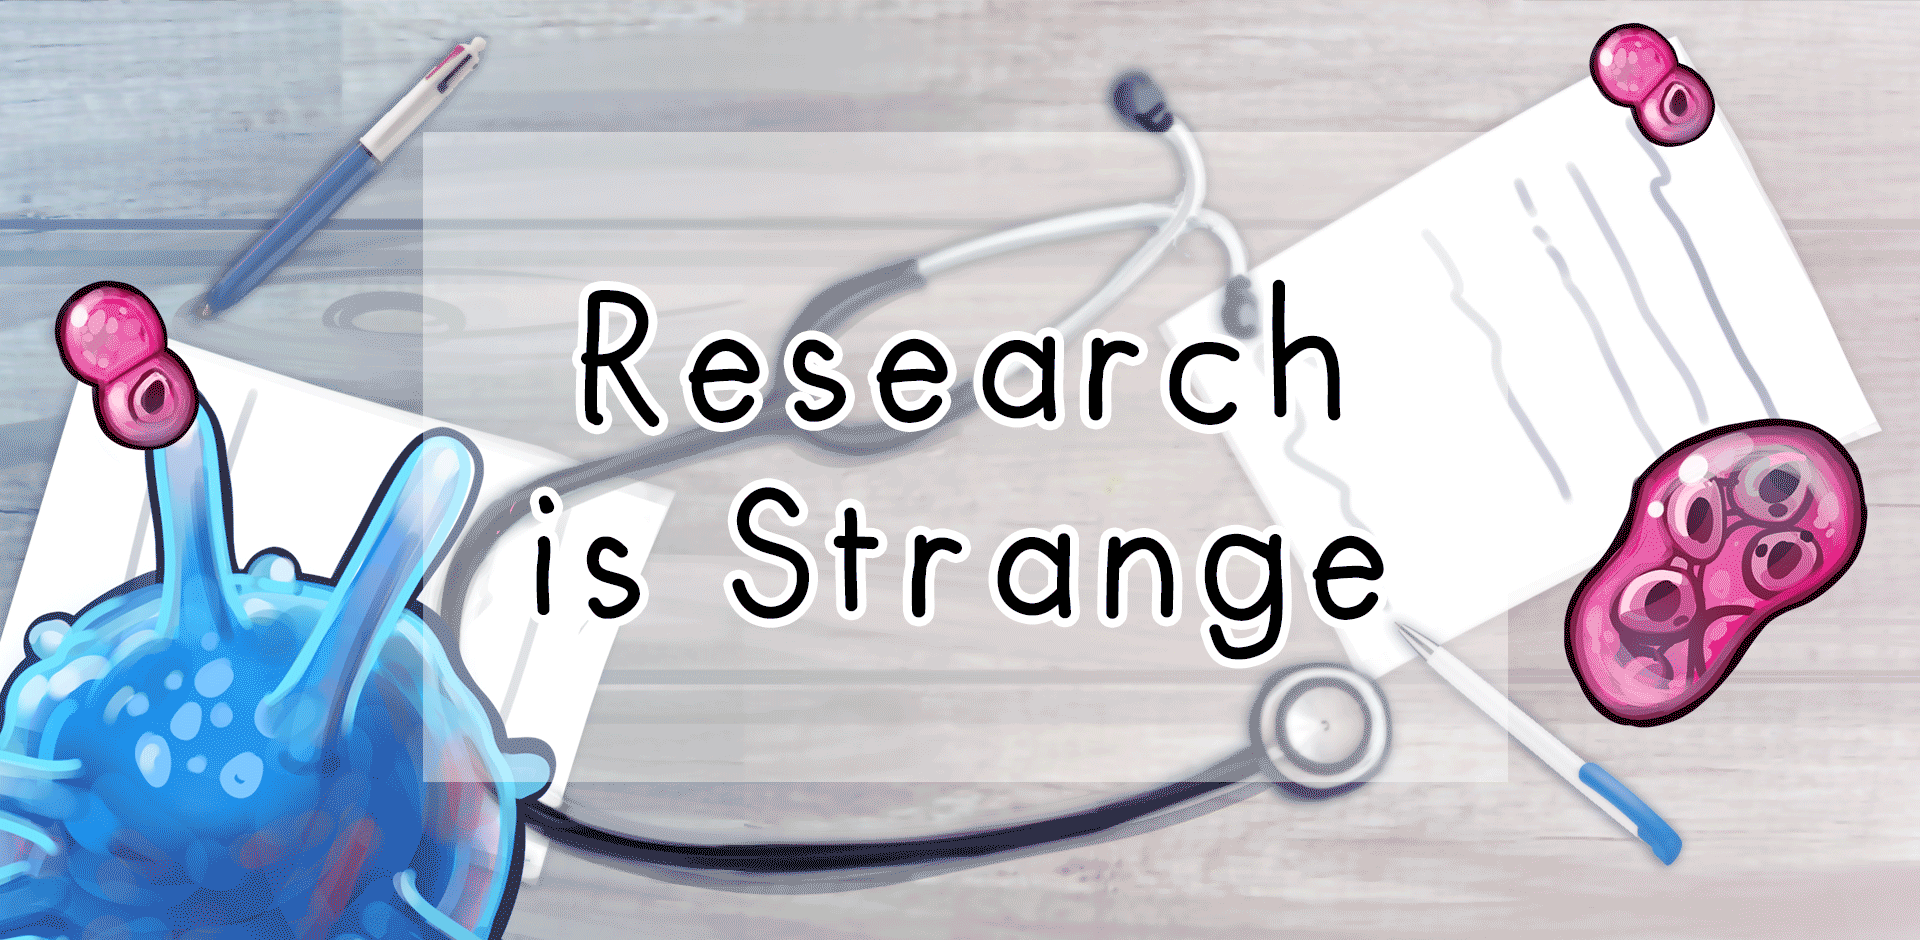 Research is strange